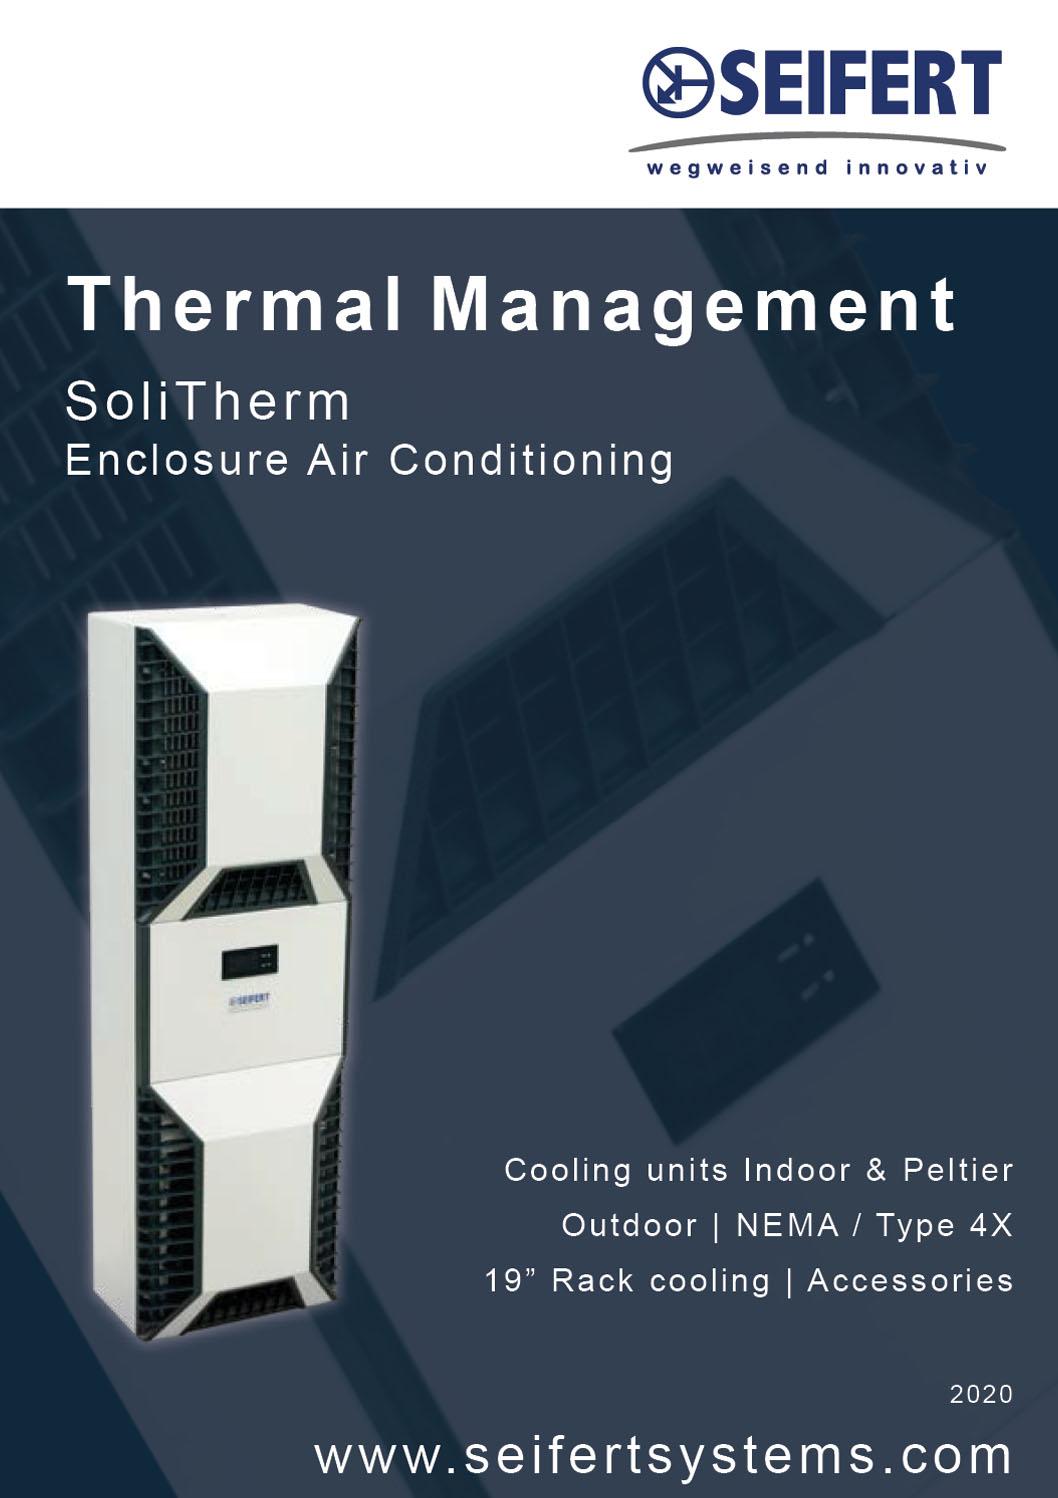 Seifert SoliTherm Enclosure Air Conditioning supplied by ElectroMechanica